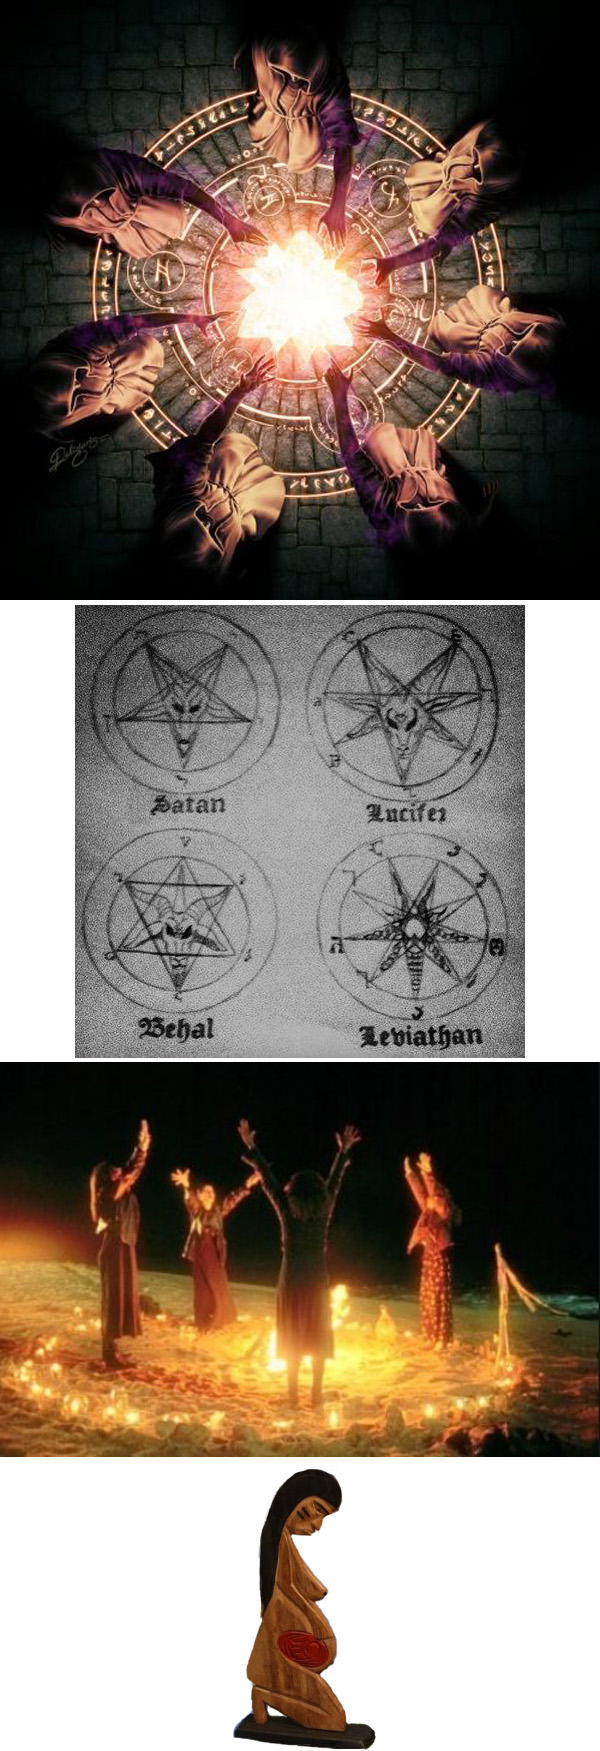 occult meaning of heptagram & circle